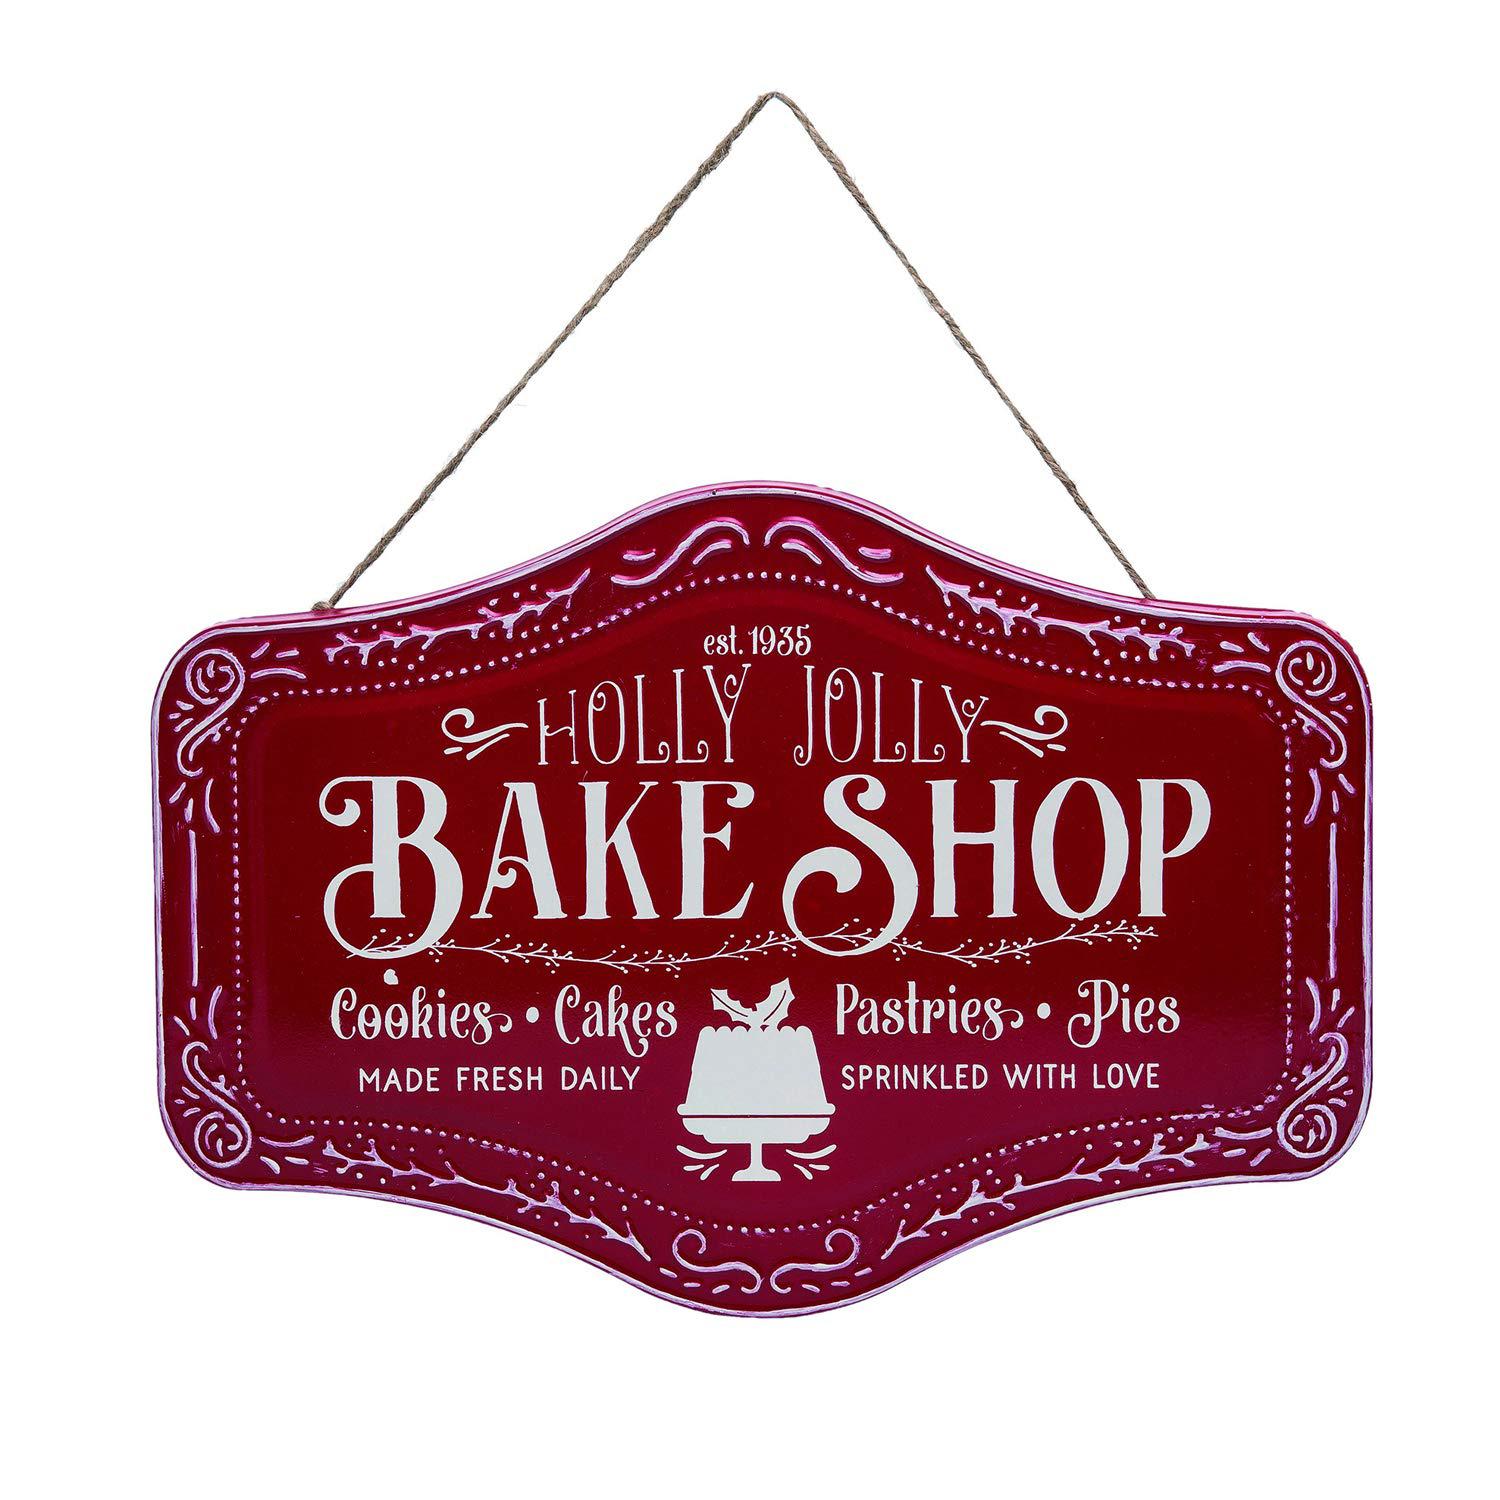 one holiday way vintage 14-inch embossed red metal christmas holly jolly bake shop bakery hanging sign - fun retro holiday wa